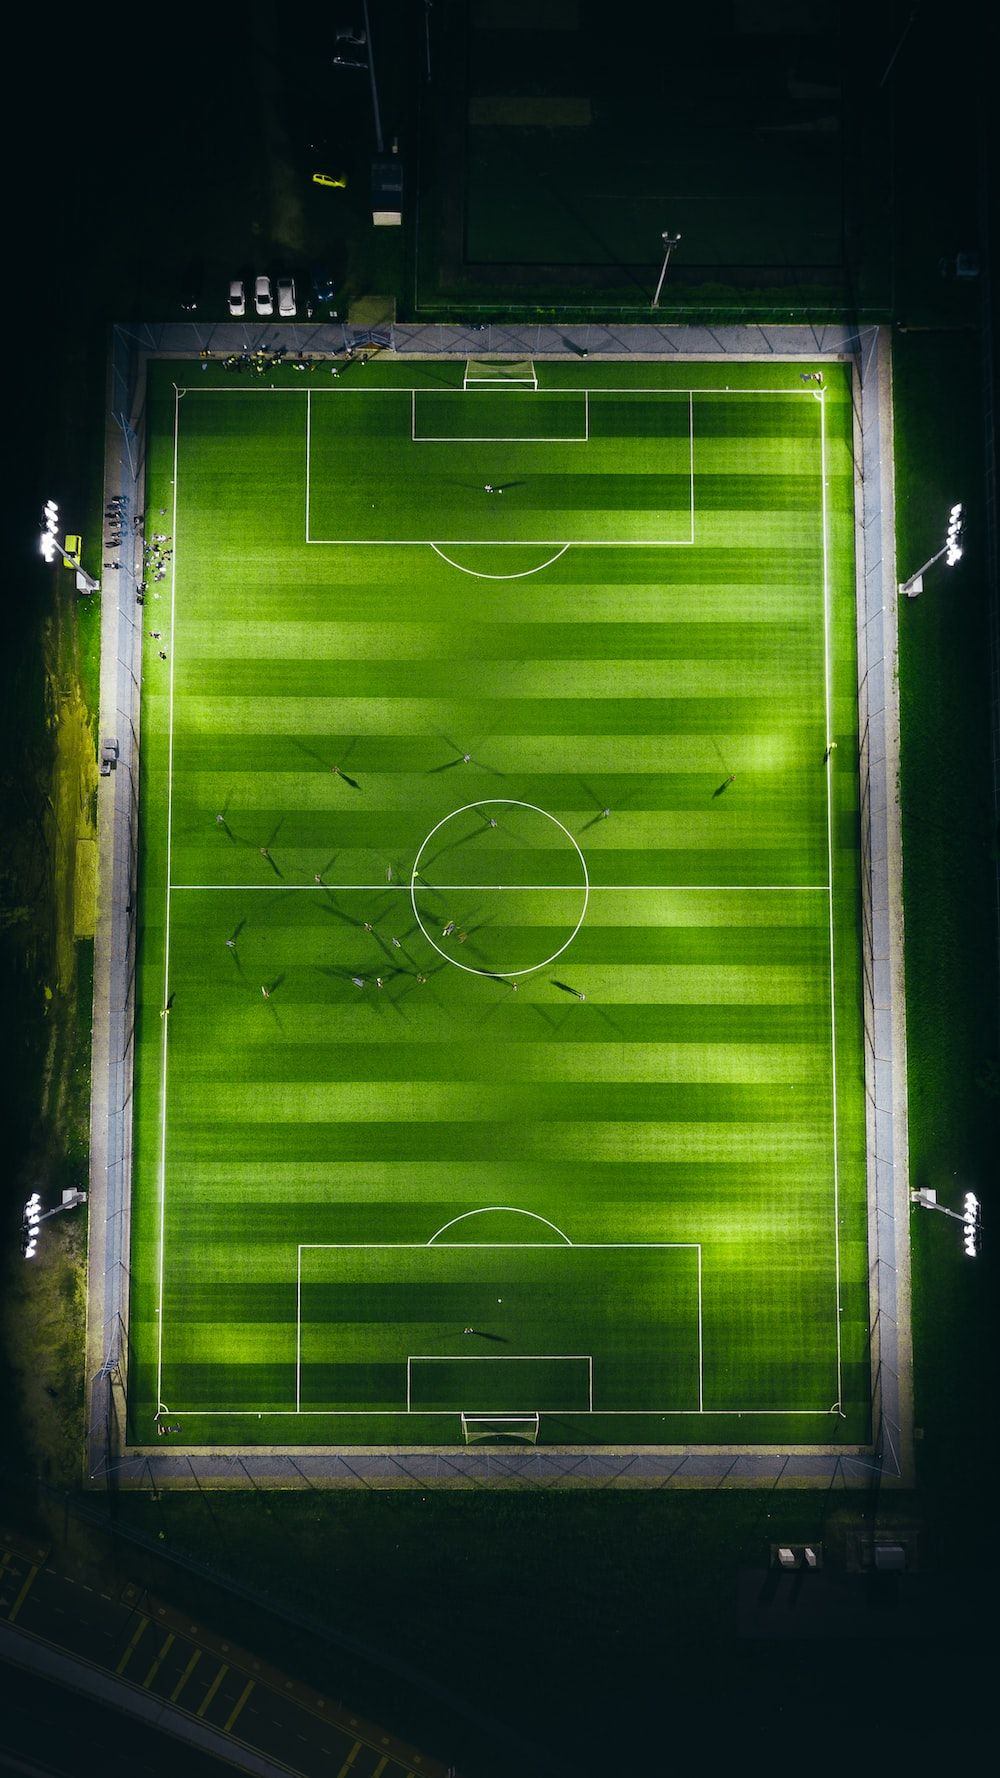 Aerial photography of a soccer field - Soccer